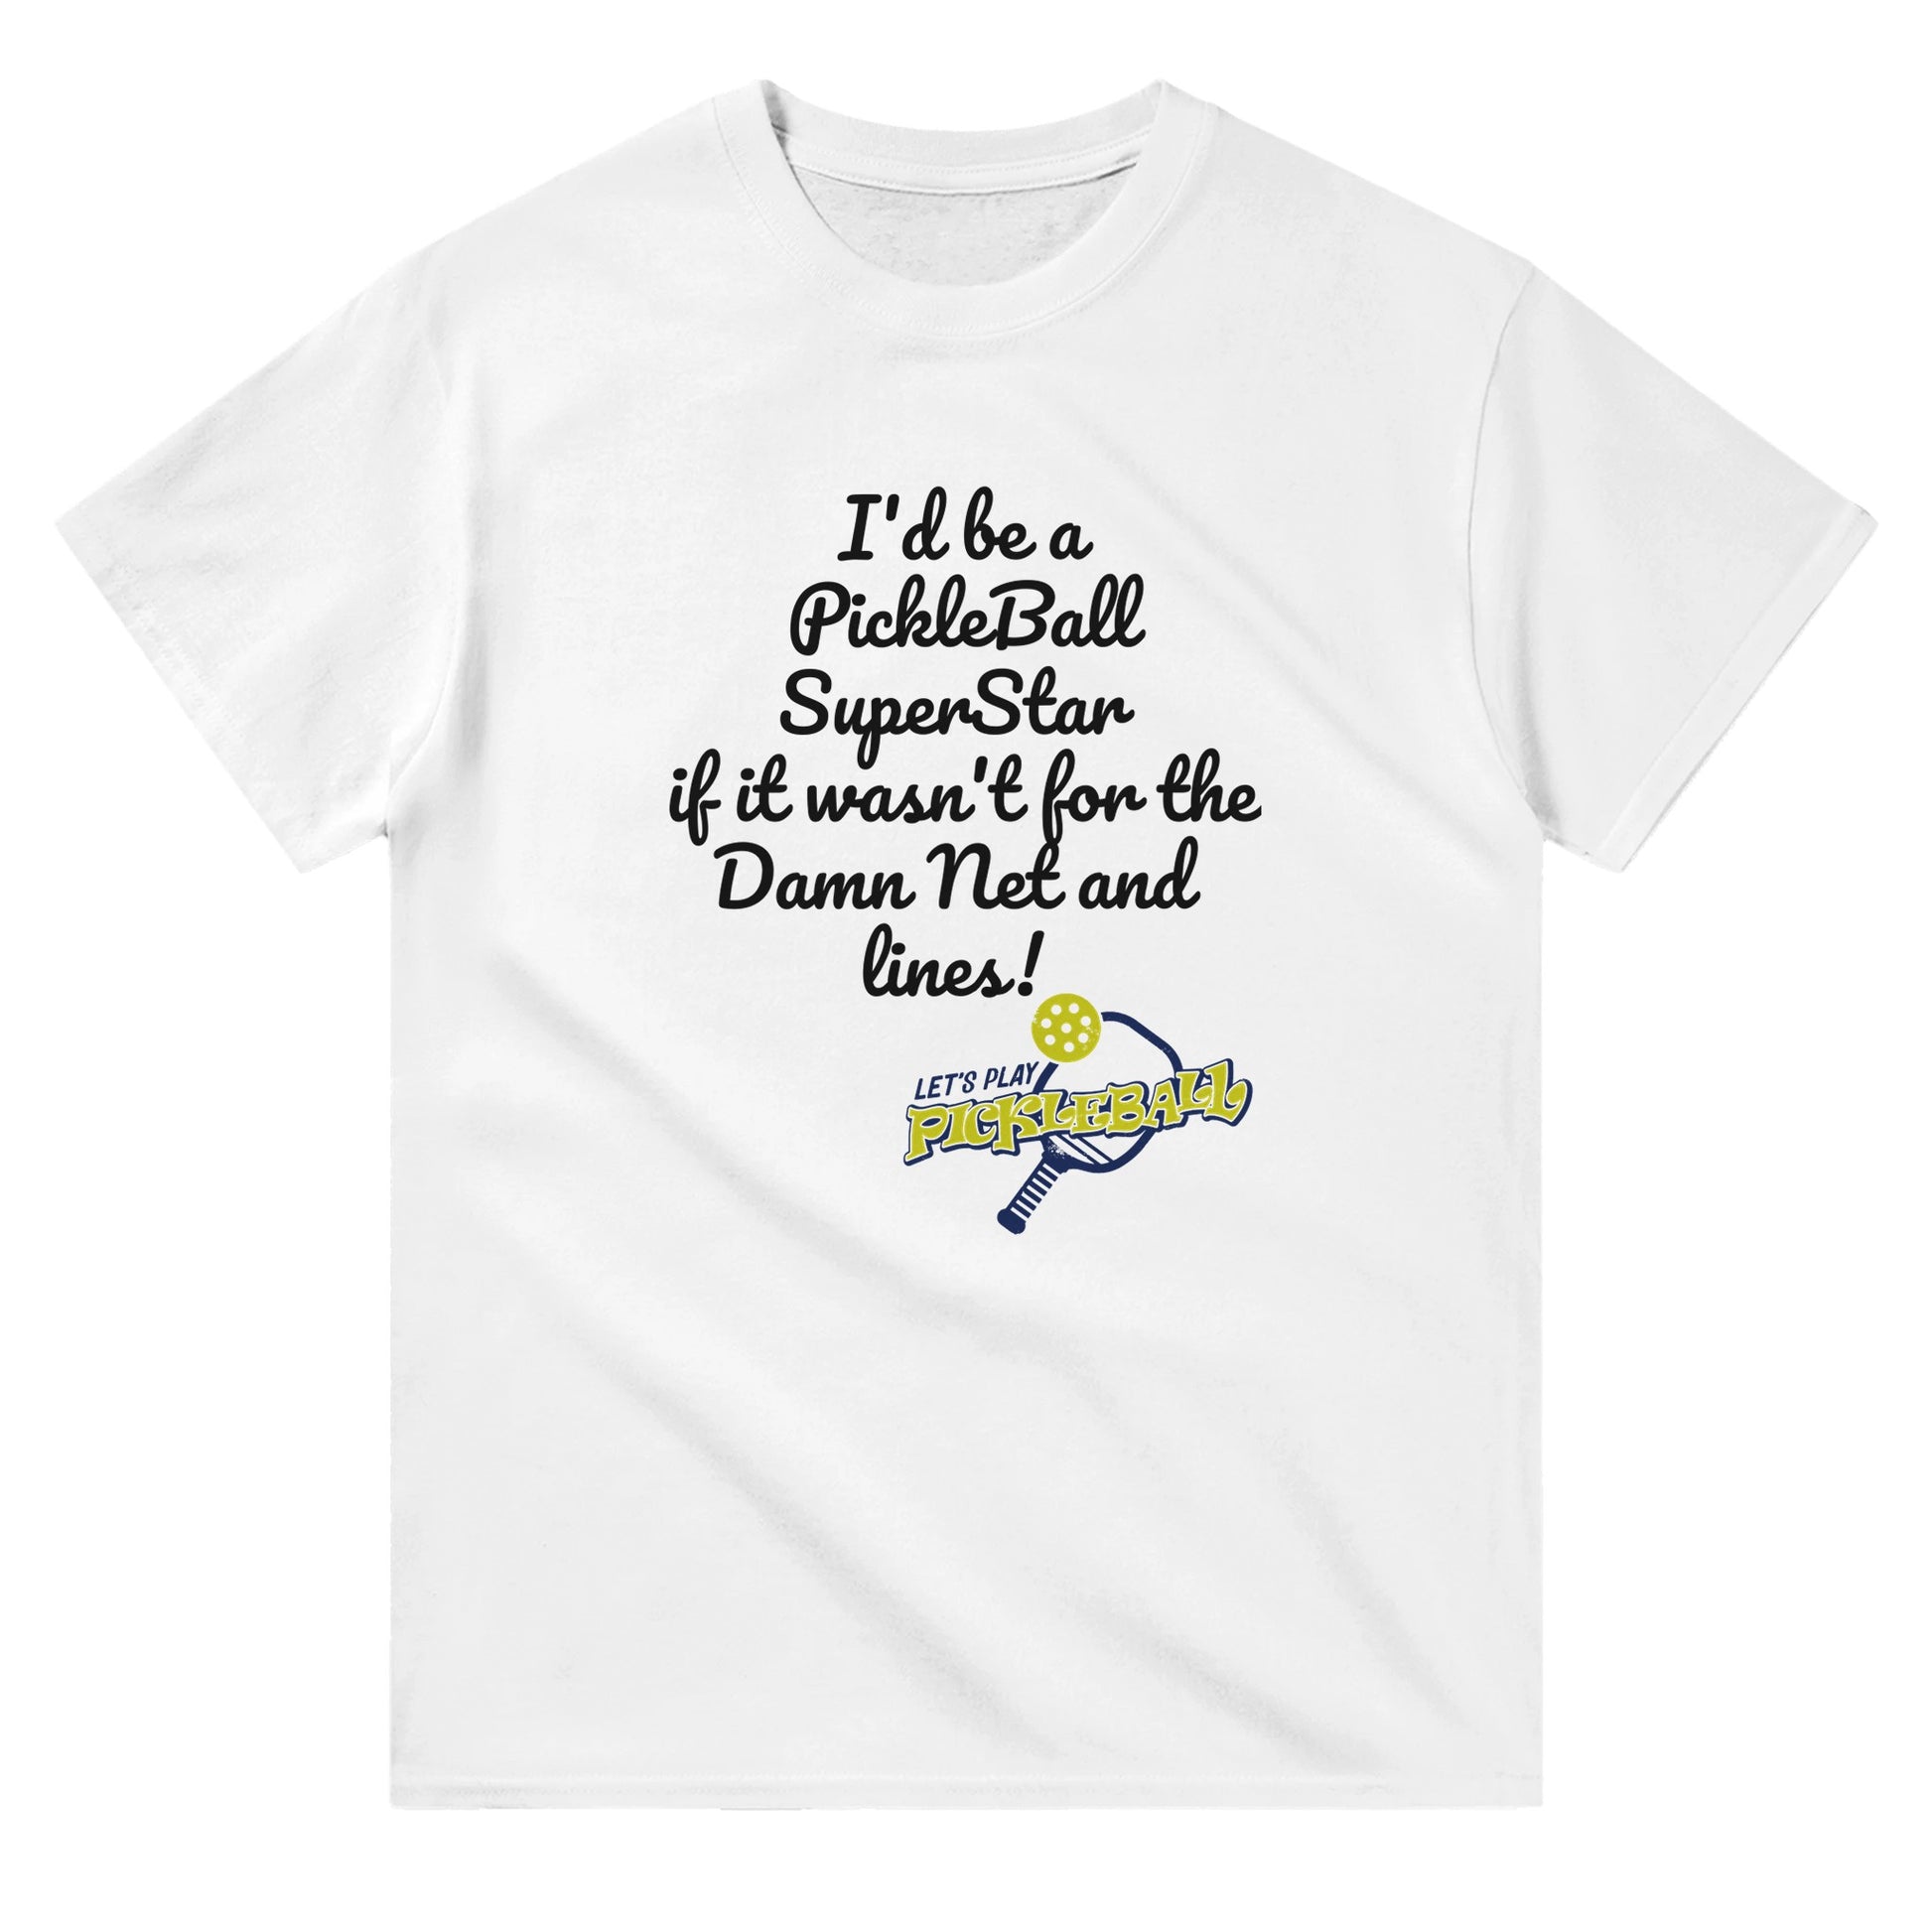 A white comfortable Unisex Crewneck heavyweight cotton t-shirt with funny saying I’d be a PickleBall SuperStar if it wasn’t for the Damn Net and Lines and Let’s Play Pickleball logo on the front from WhatYa Say Apparel lying flat.